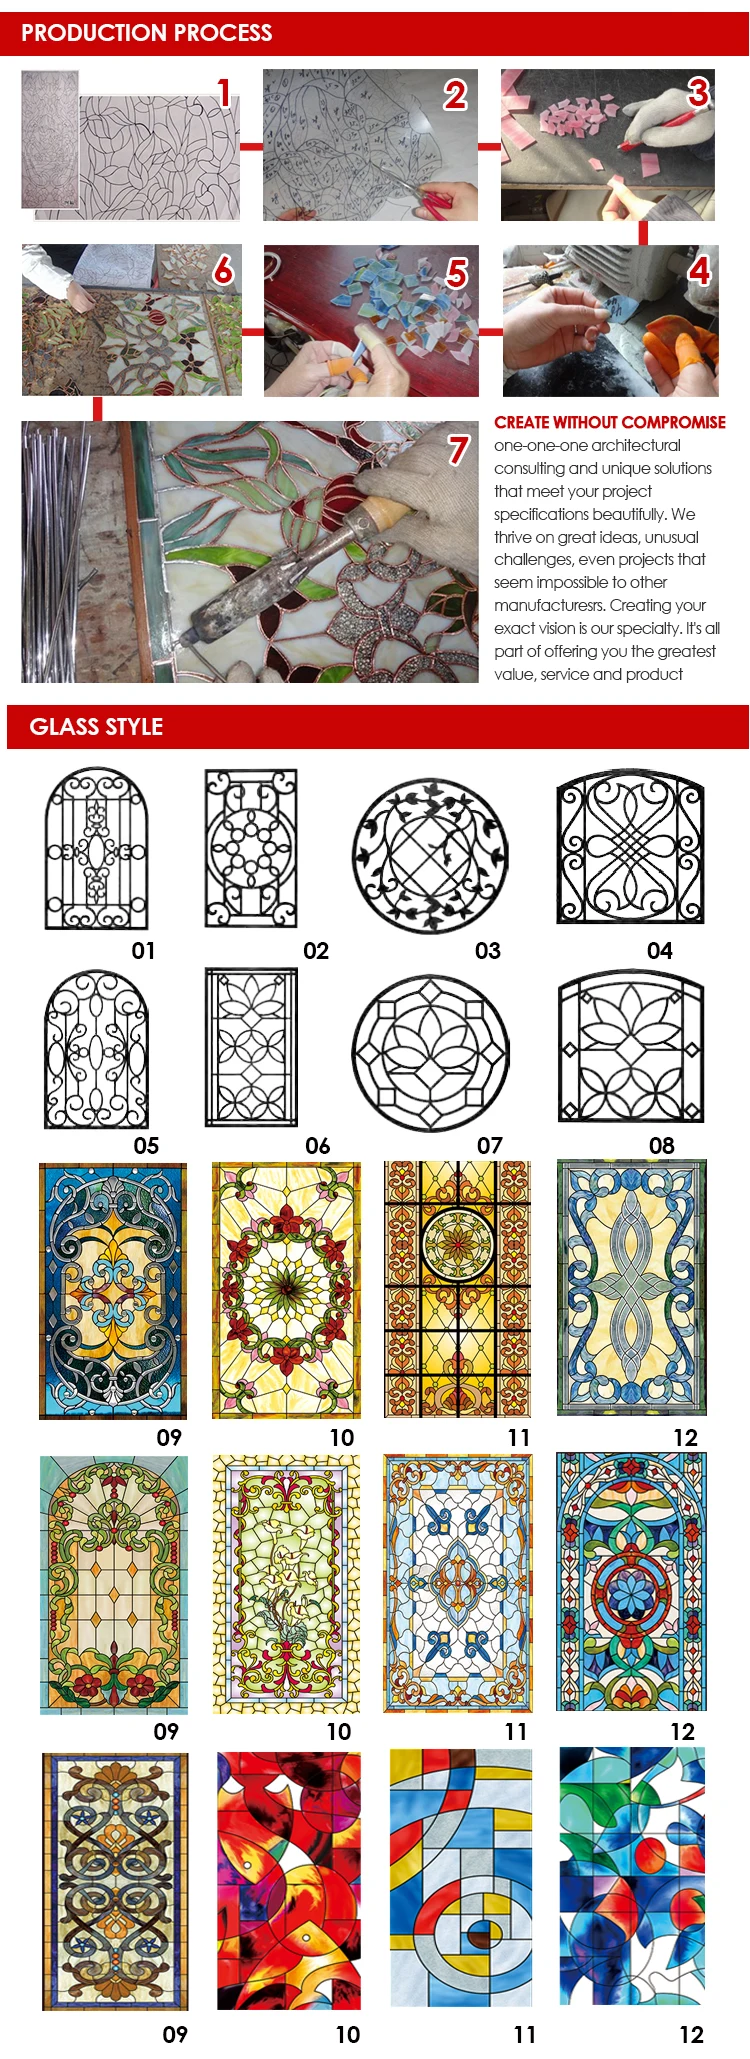 Seattle church stained glass windows small window panels for sale